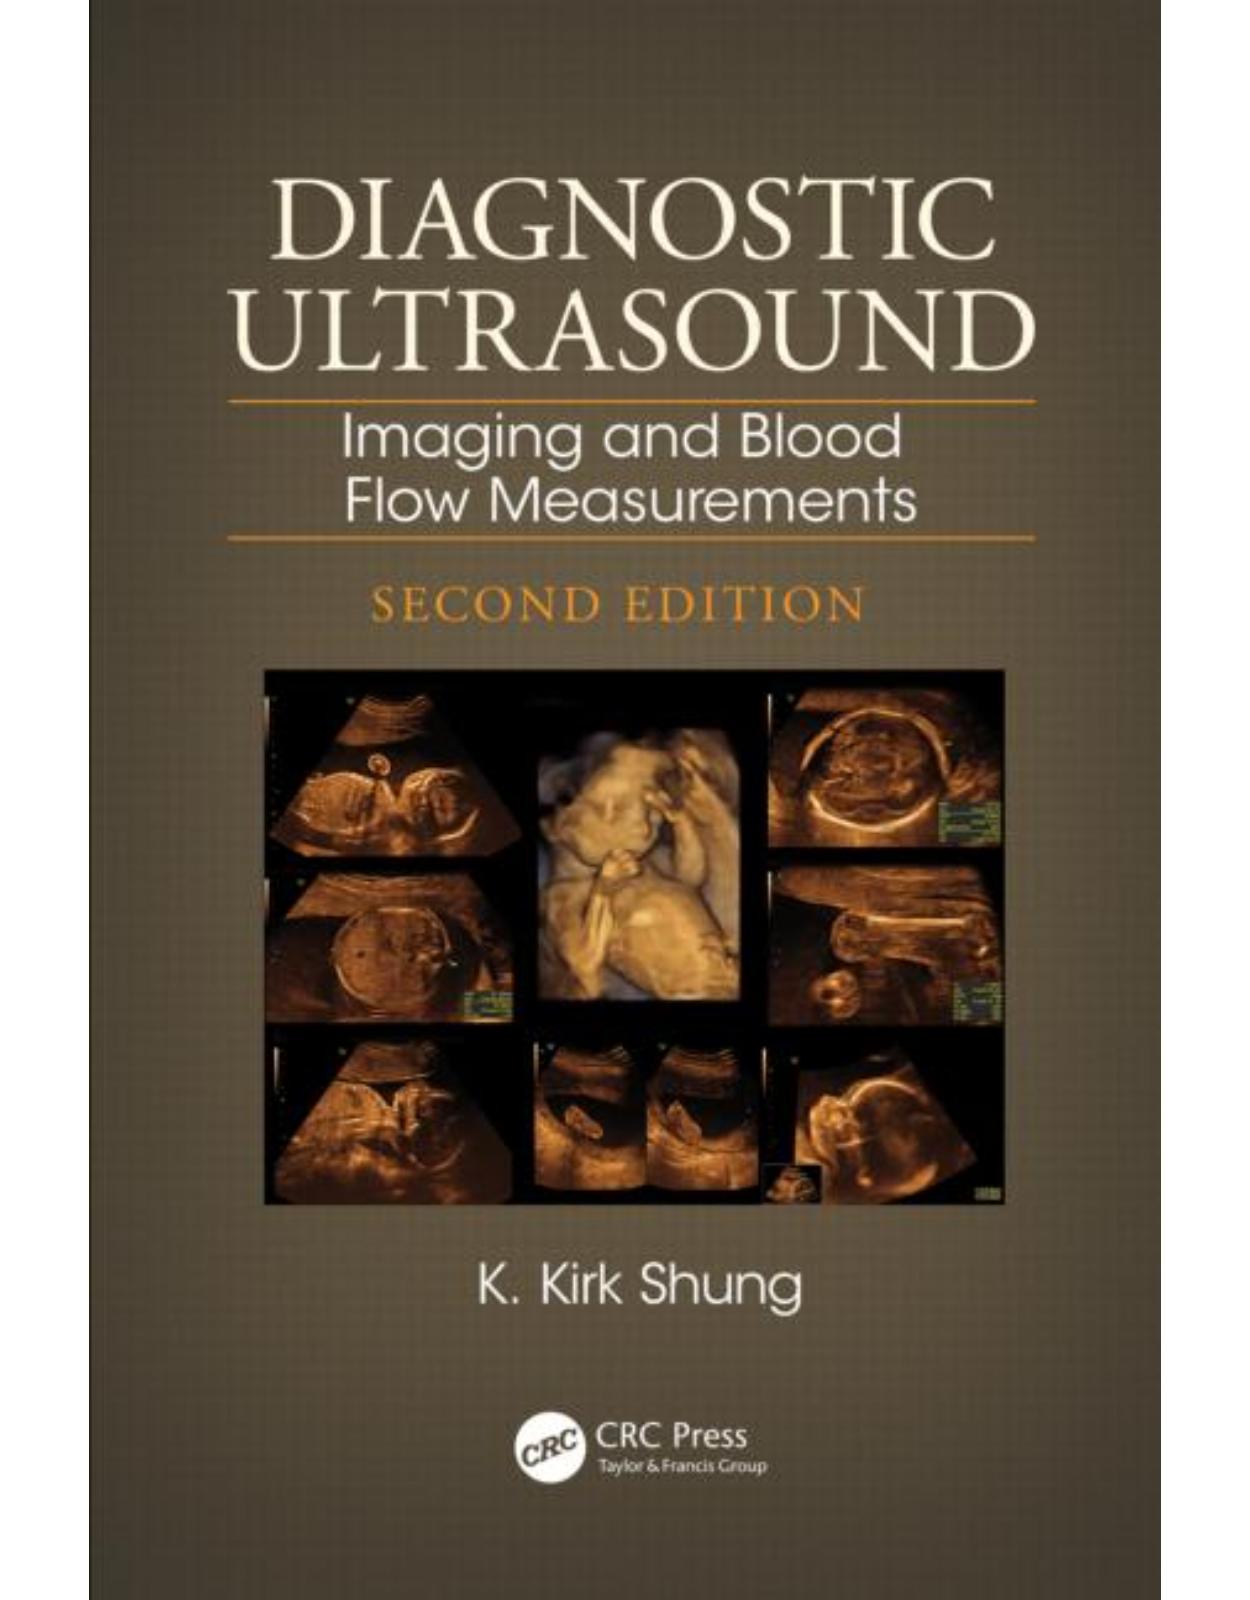 Diagnostic Ultrasound: Imaging and Blood Flow Measurements, Second Edition